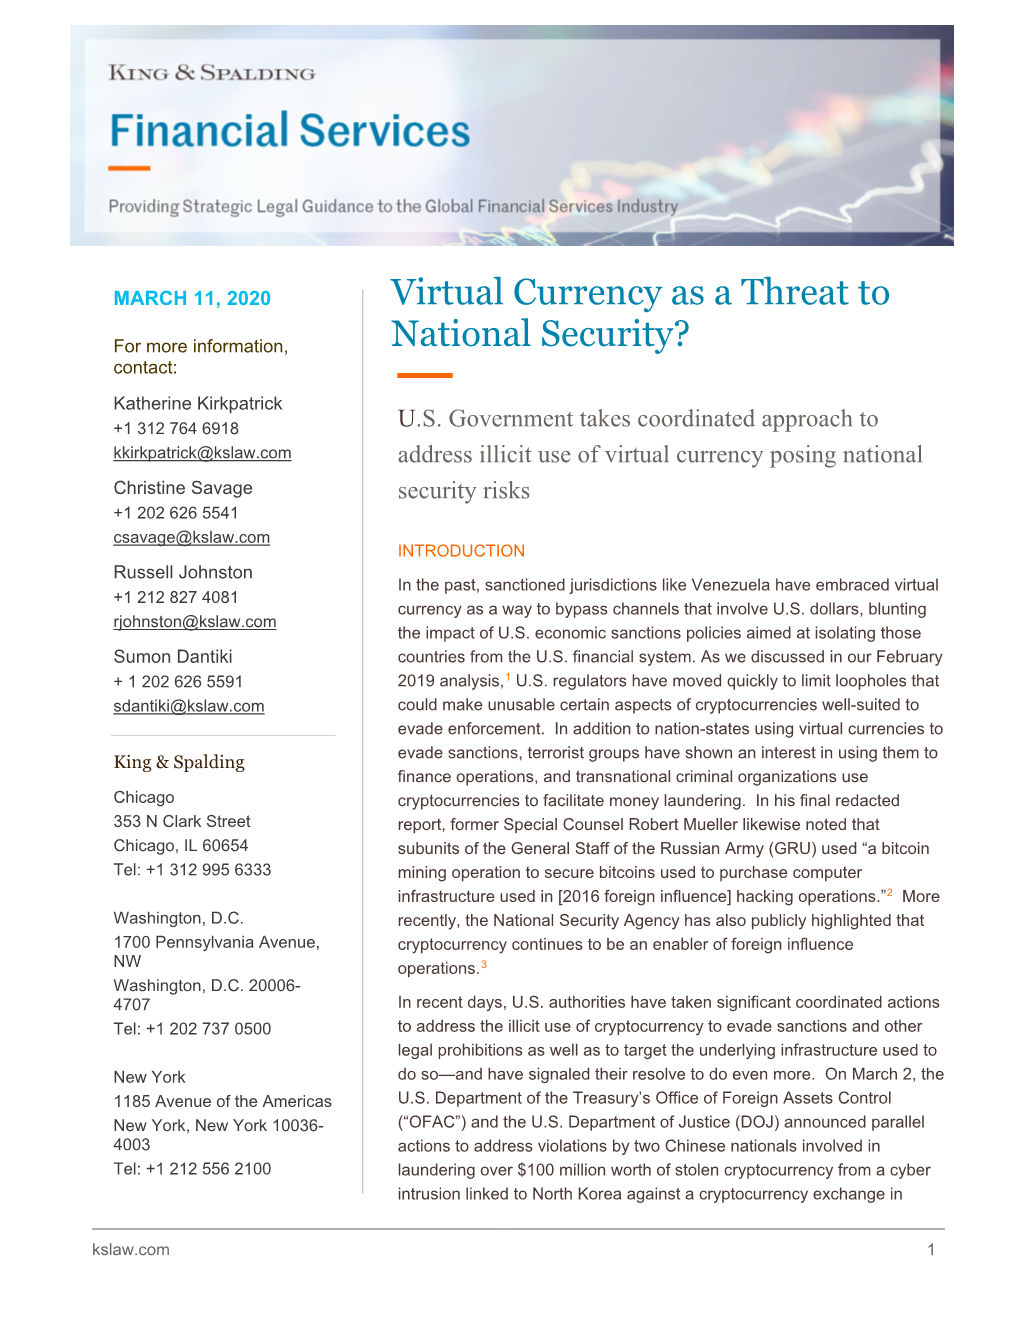 Virtual Currency As a Threat to National Security?